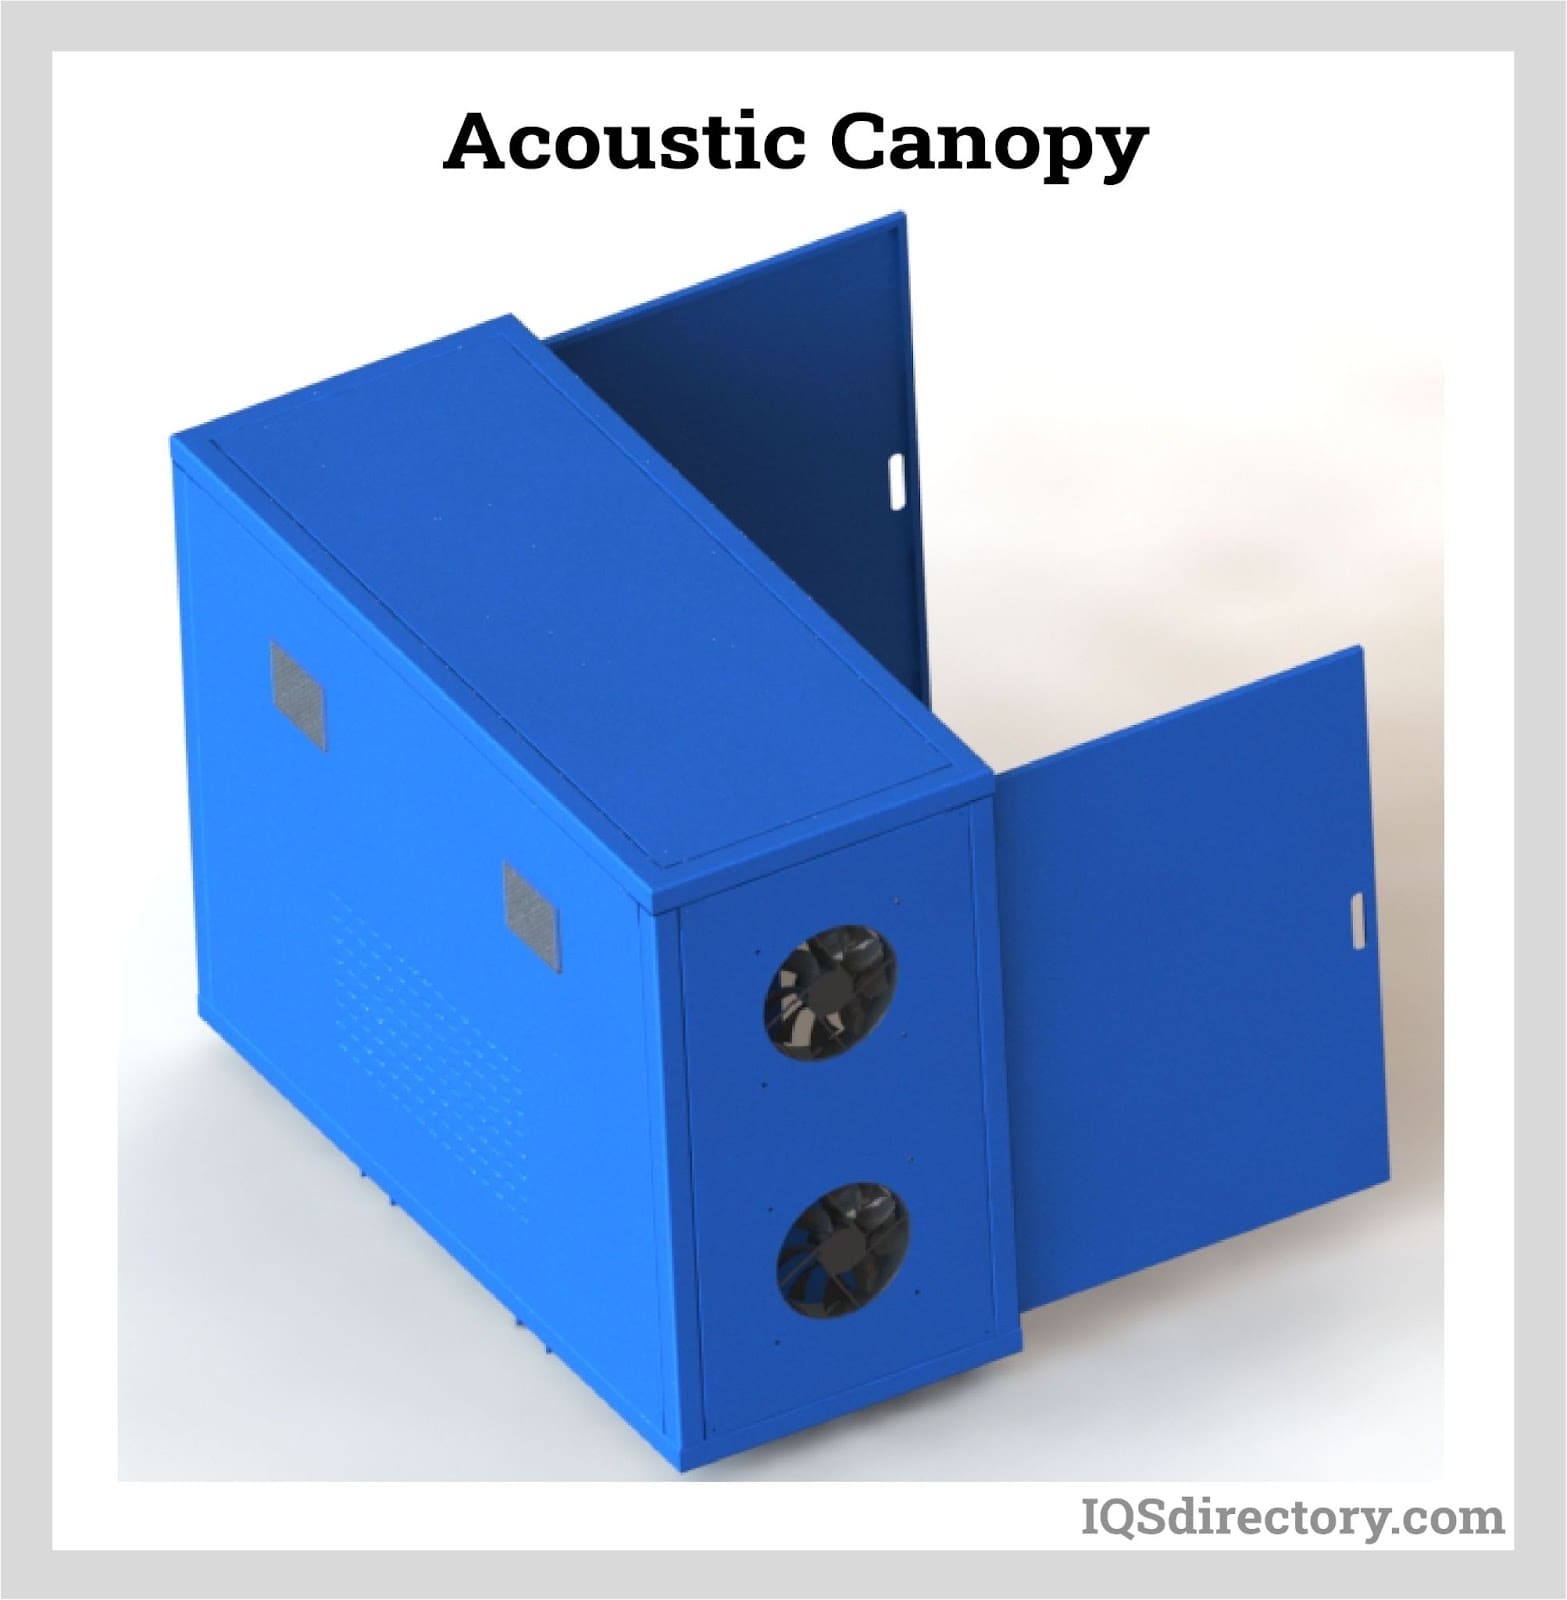 Acoustic Canopy